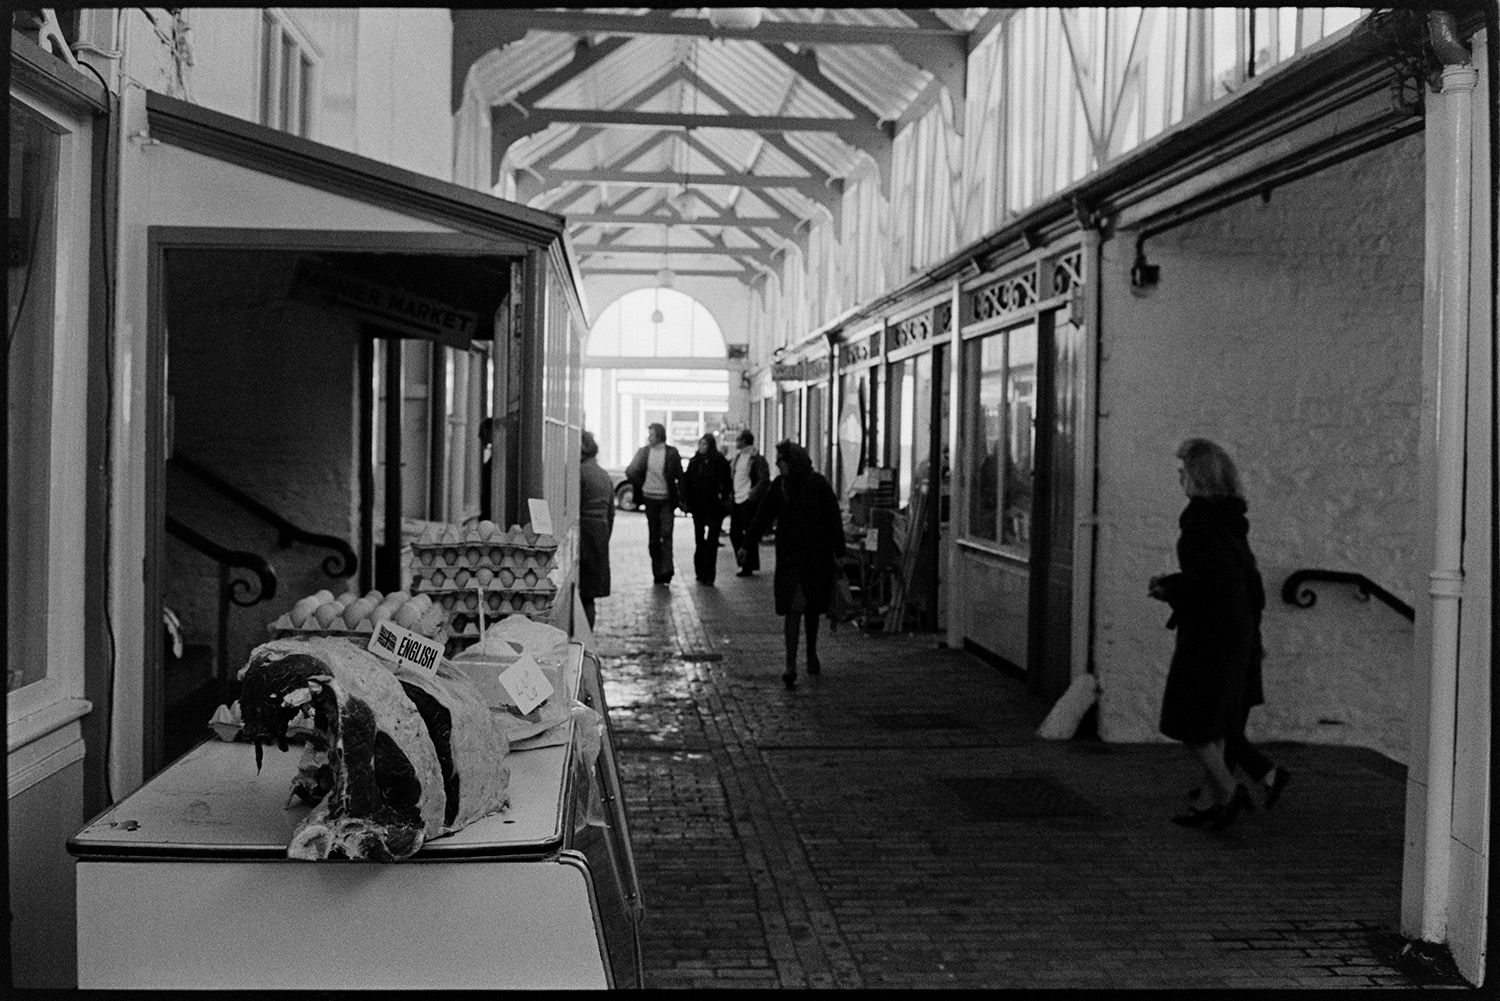 Pannier market, trug ,boots. 
[People walking along a passageway inside Bideford Pannier Market. In the foreground is a stall with cuts of meat and eggs for sale.]